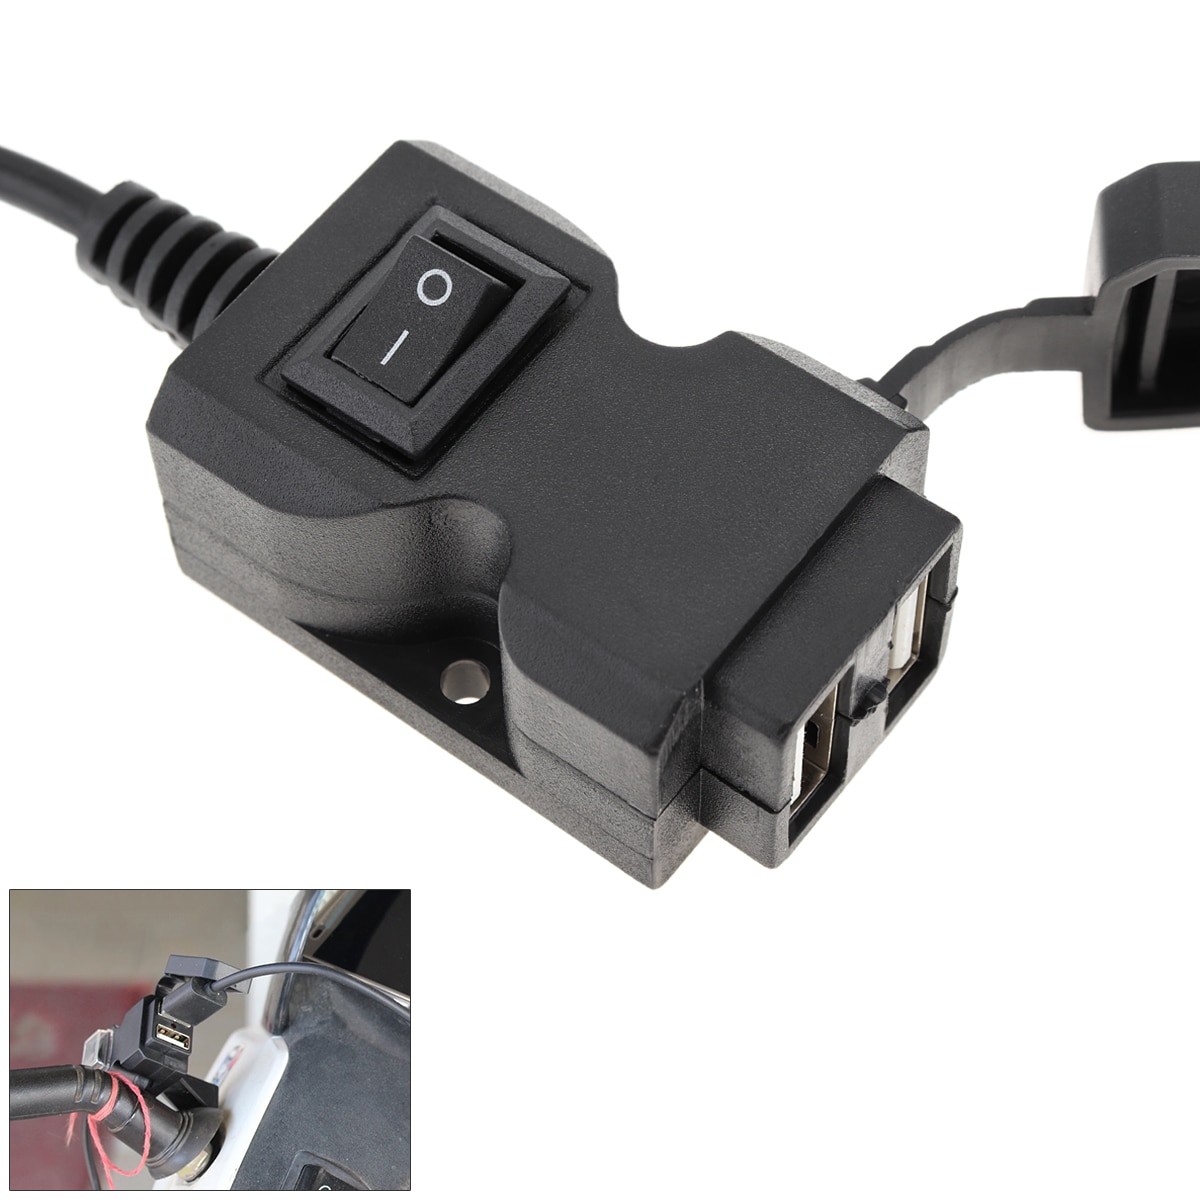 Dual Usb-poort 12V Waterdicht Motorfiets Stuur Charger 5V 1A/2.1A Adapter Stopcontact Voor mobiele